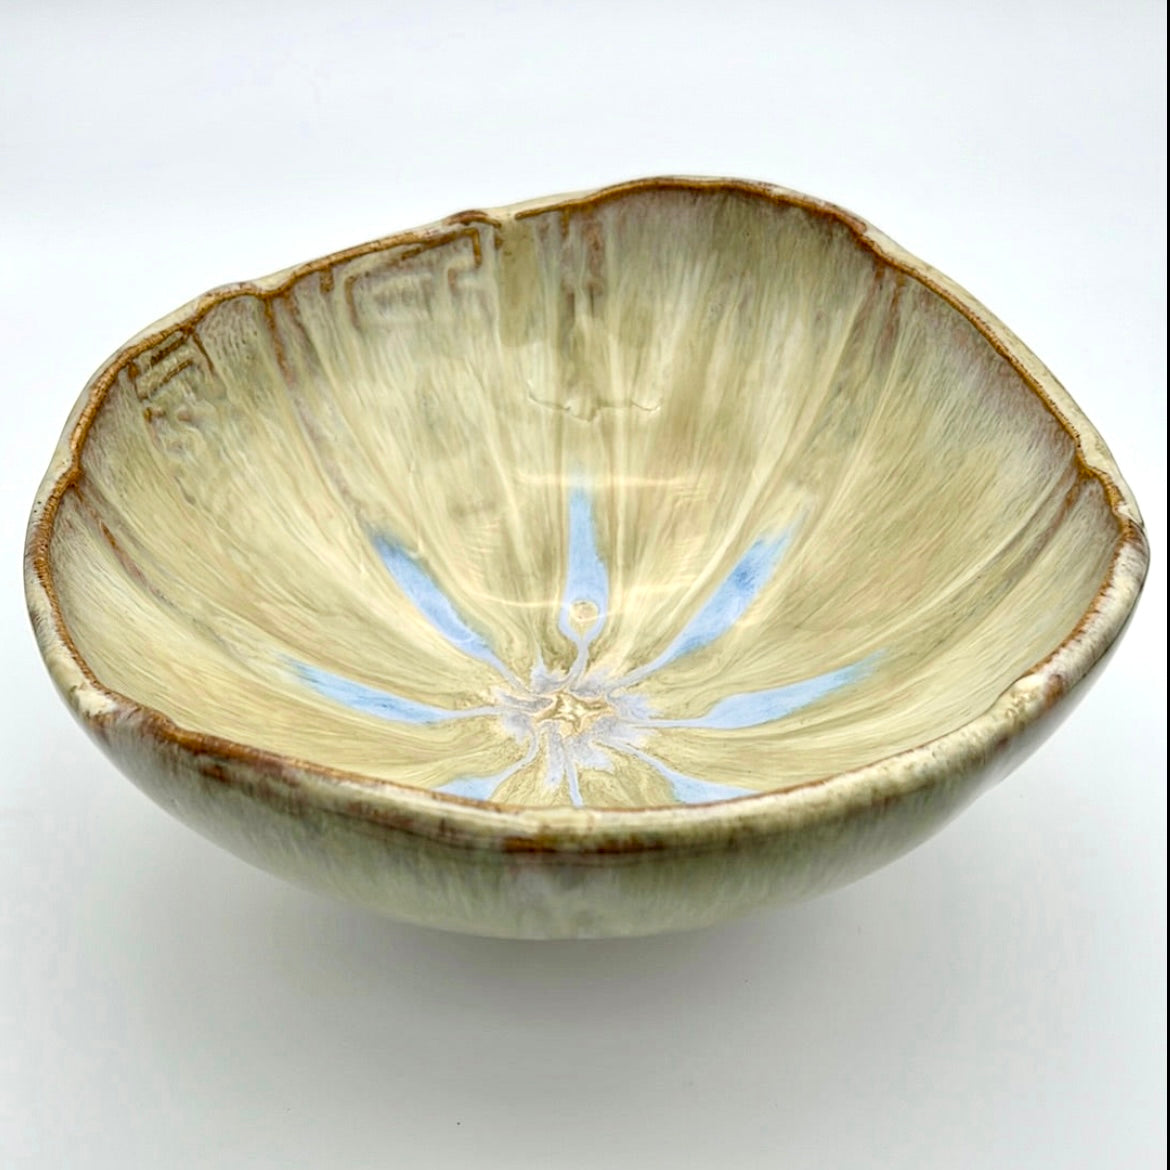 Centerpiece Serving Bowl | ROCK HOME Collection | 9” long x 9” wide x 4” tall